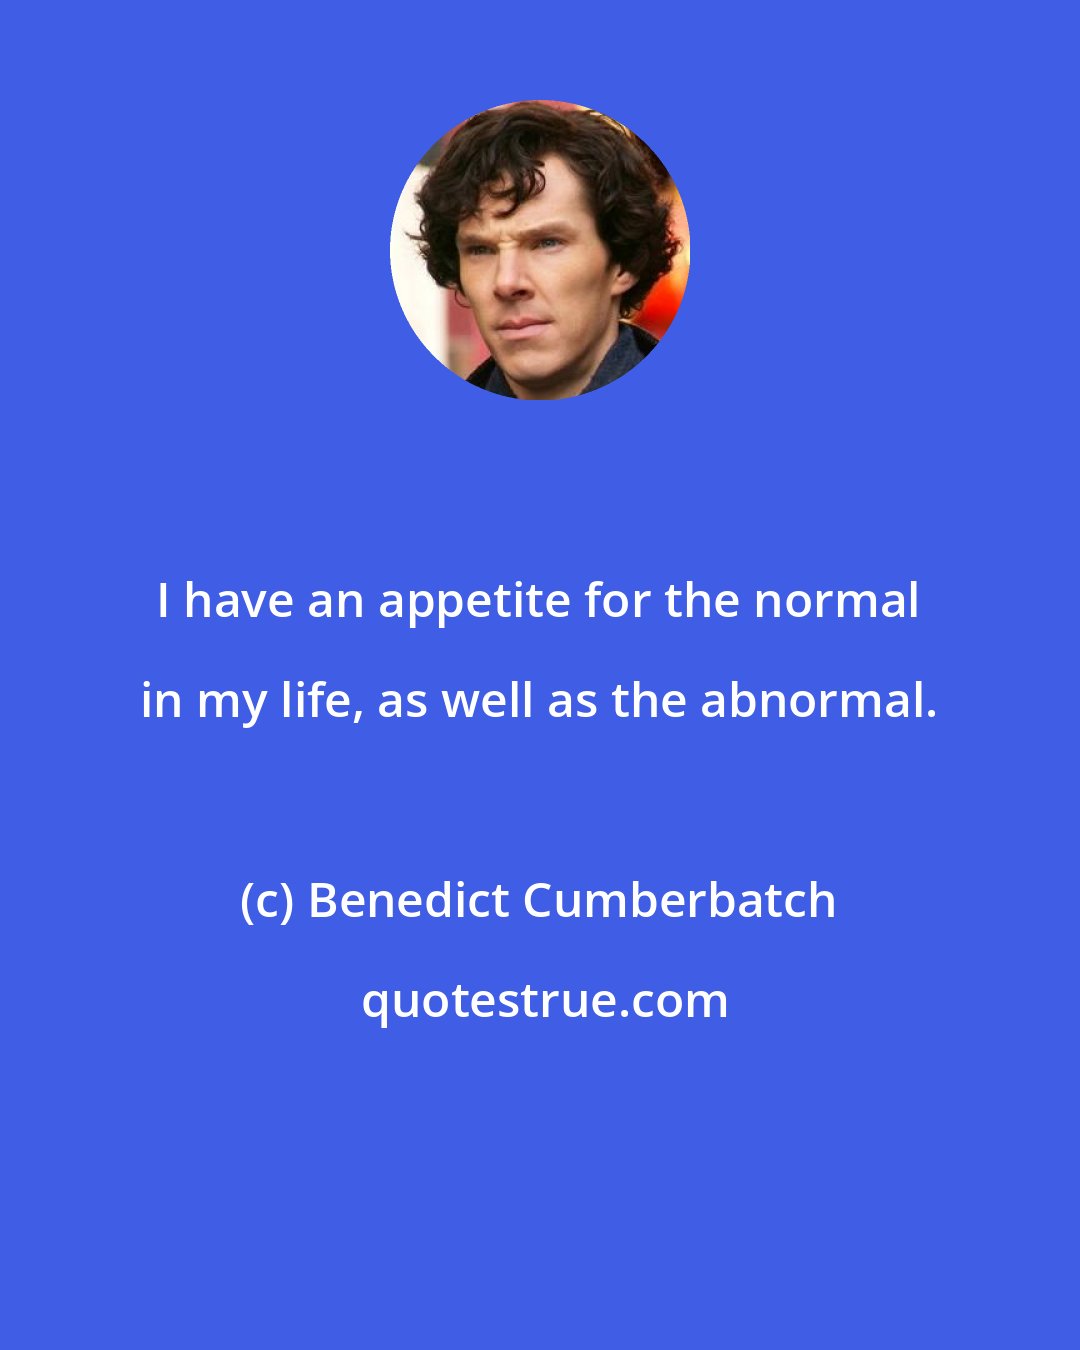 Benedict Cumberbatch: I have an appetite for the normal in my life, as well as the abnormal.